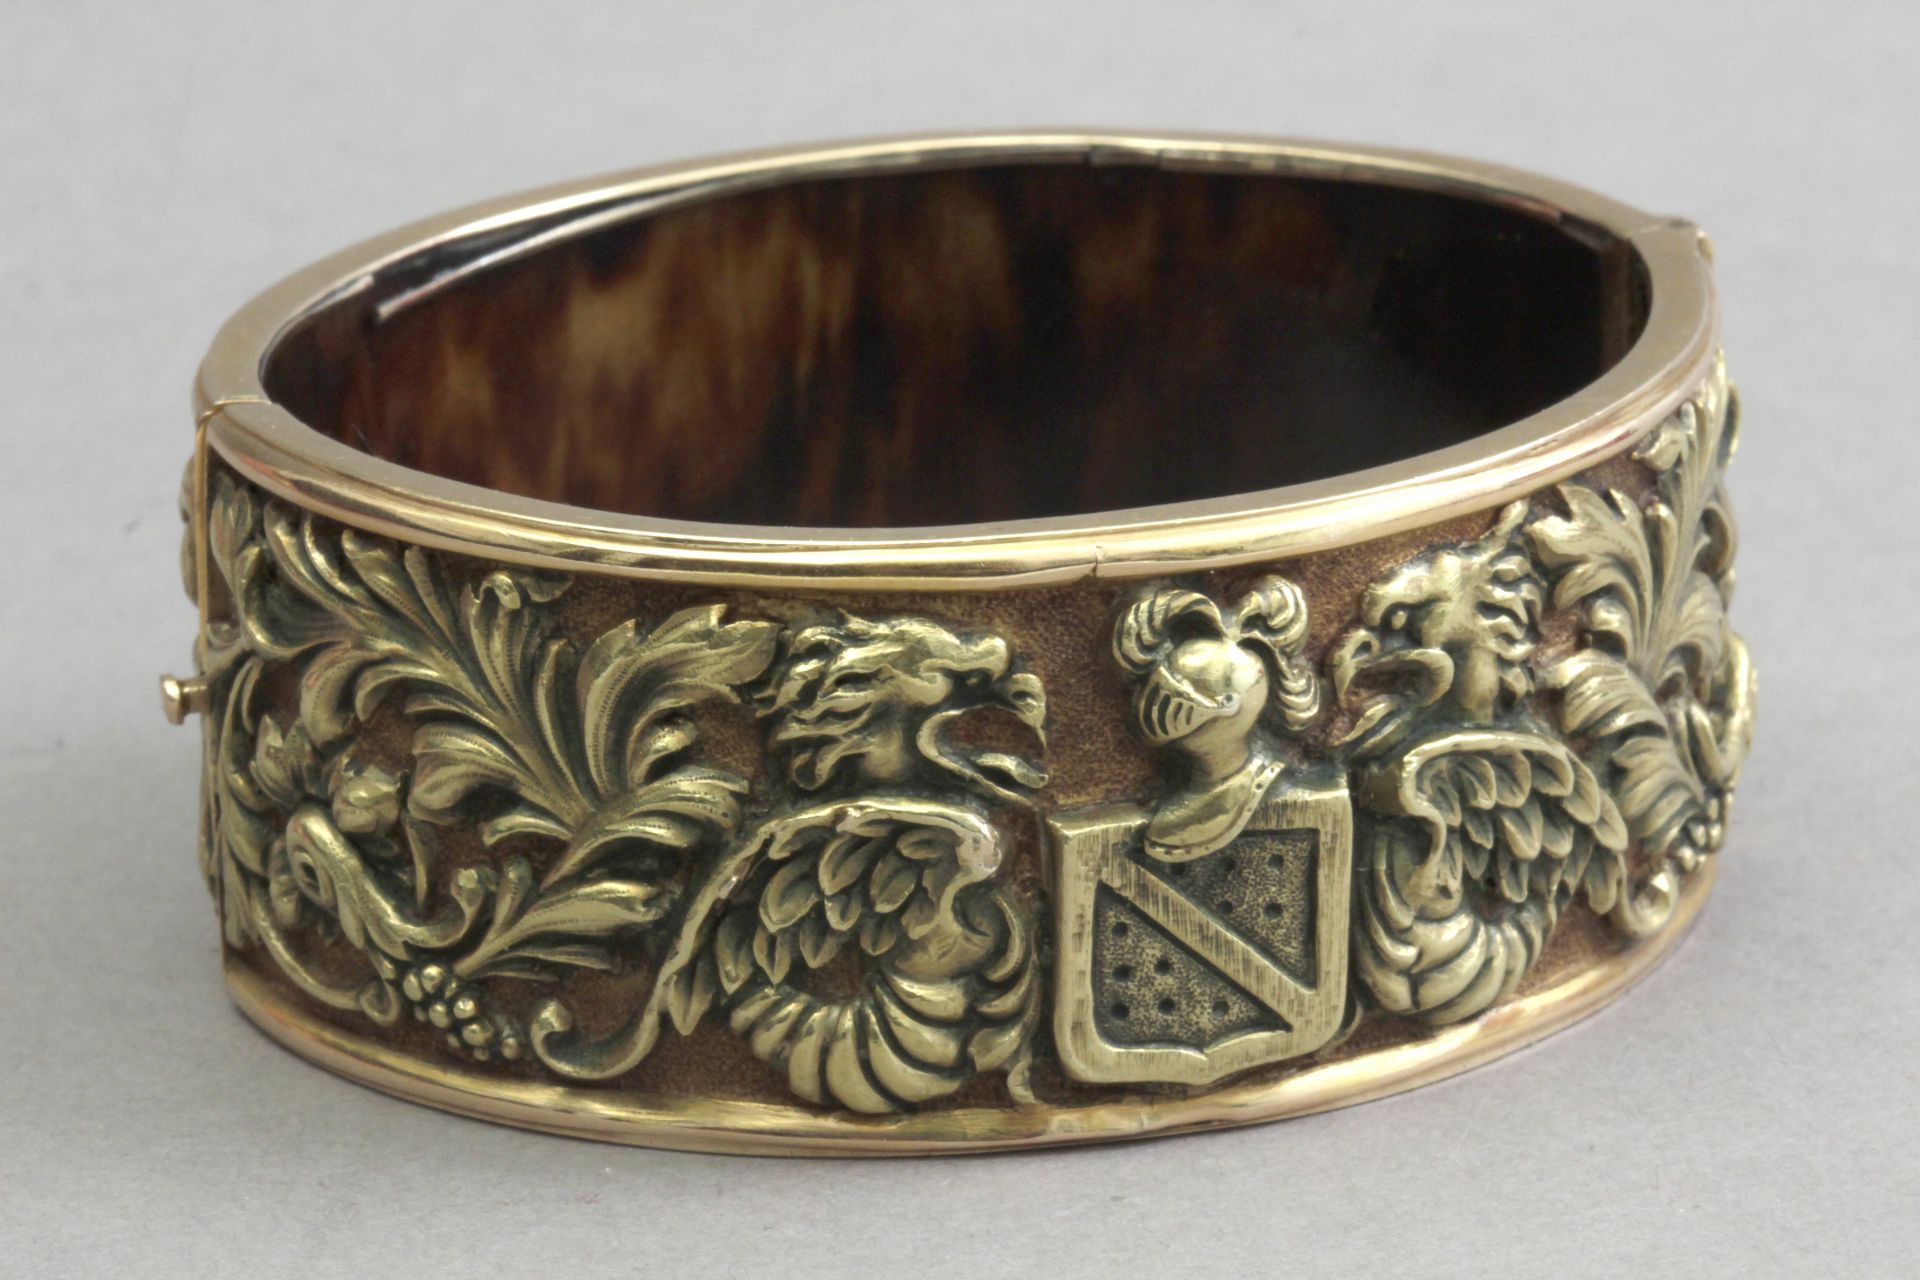 Possibly Fuset I Grau. A late 19th century bangle in 18k. yellow gold and tortoiseshell